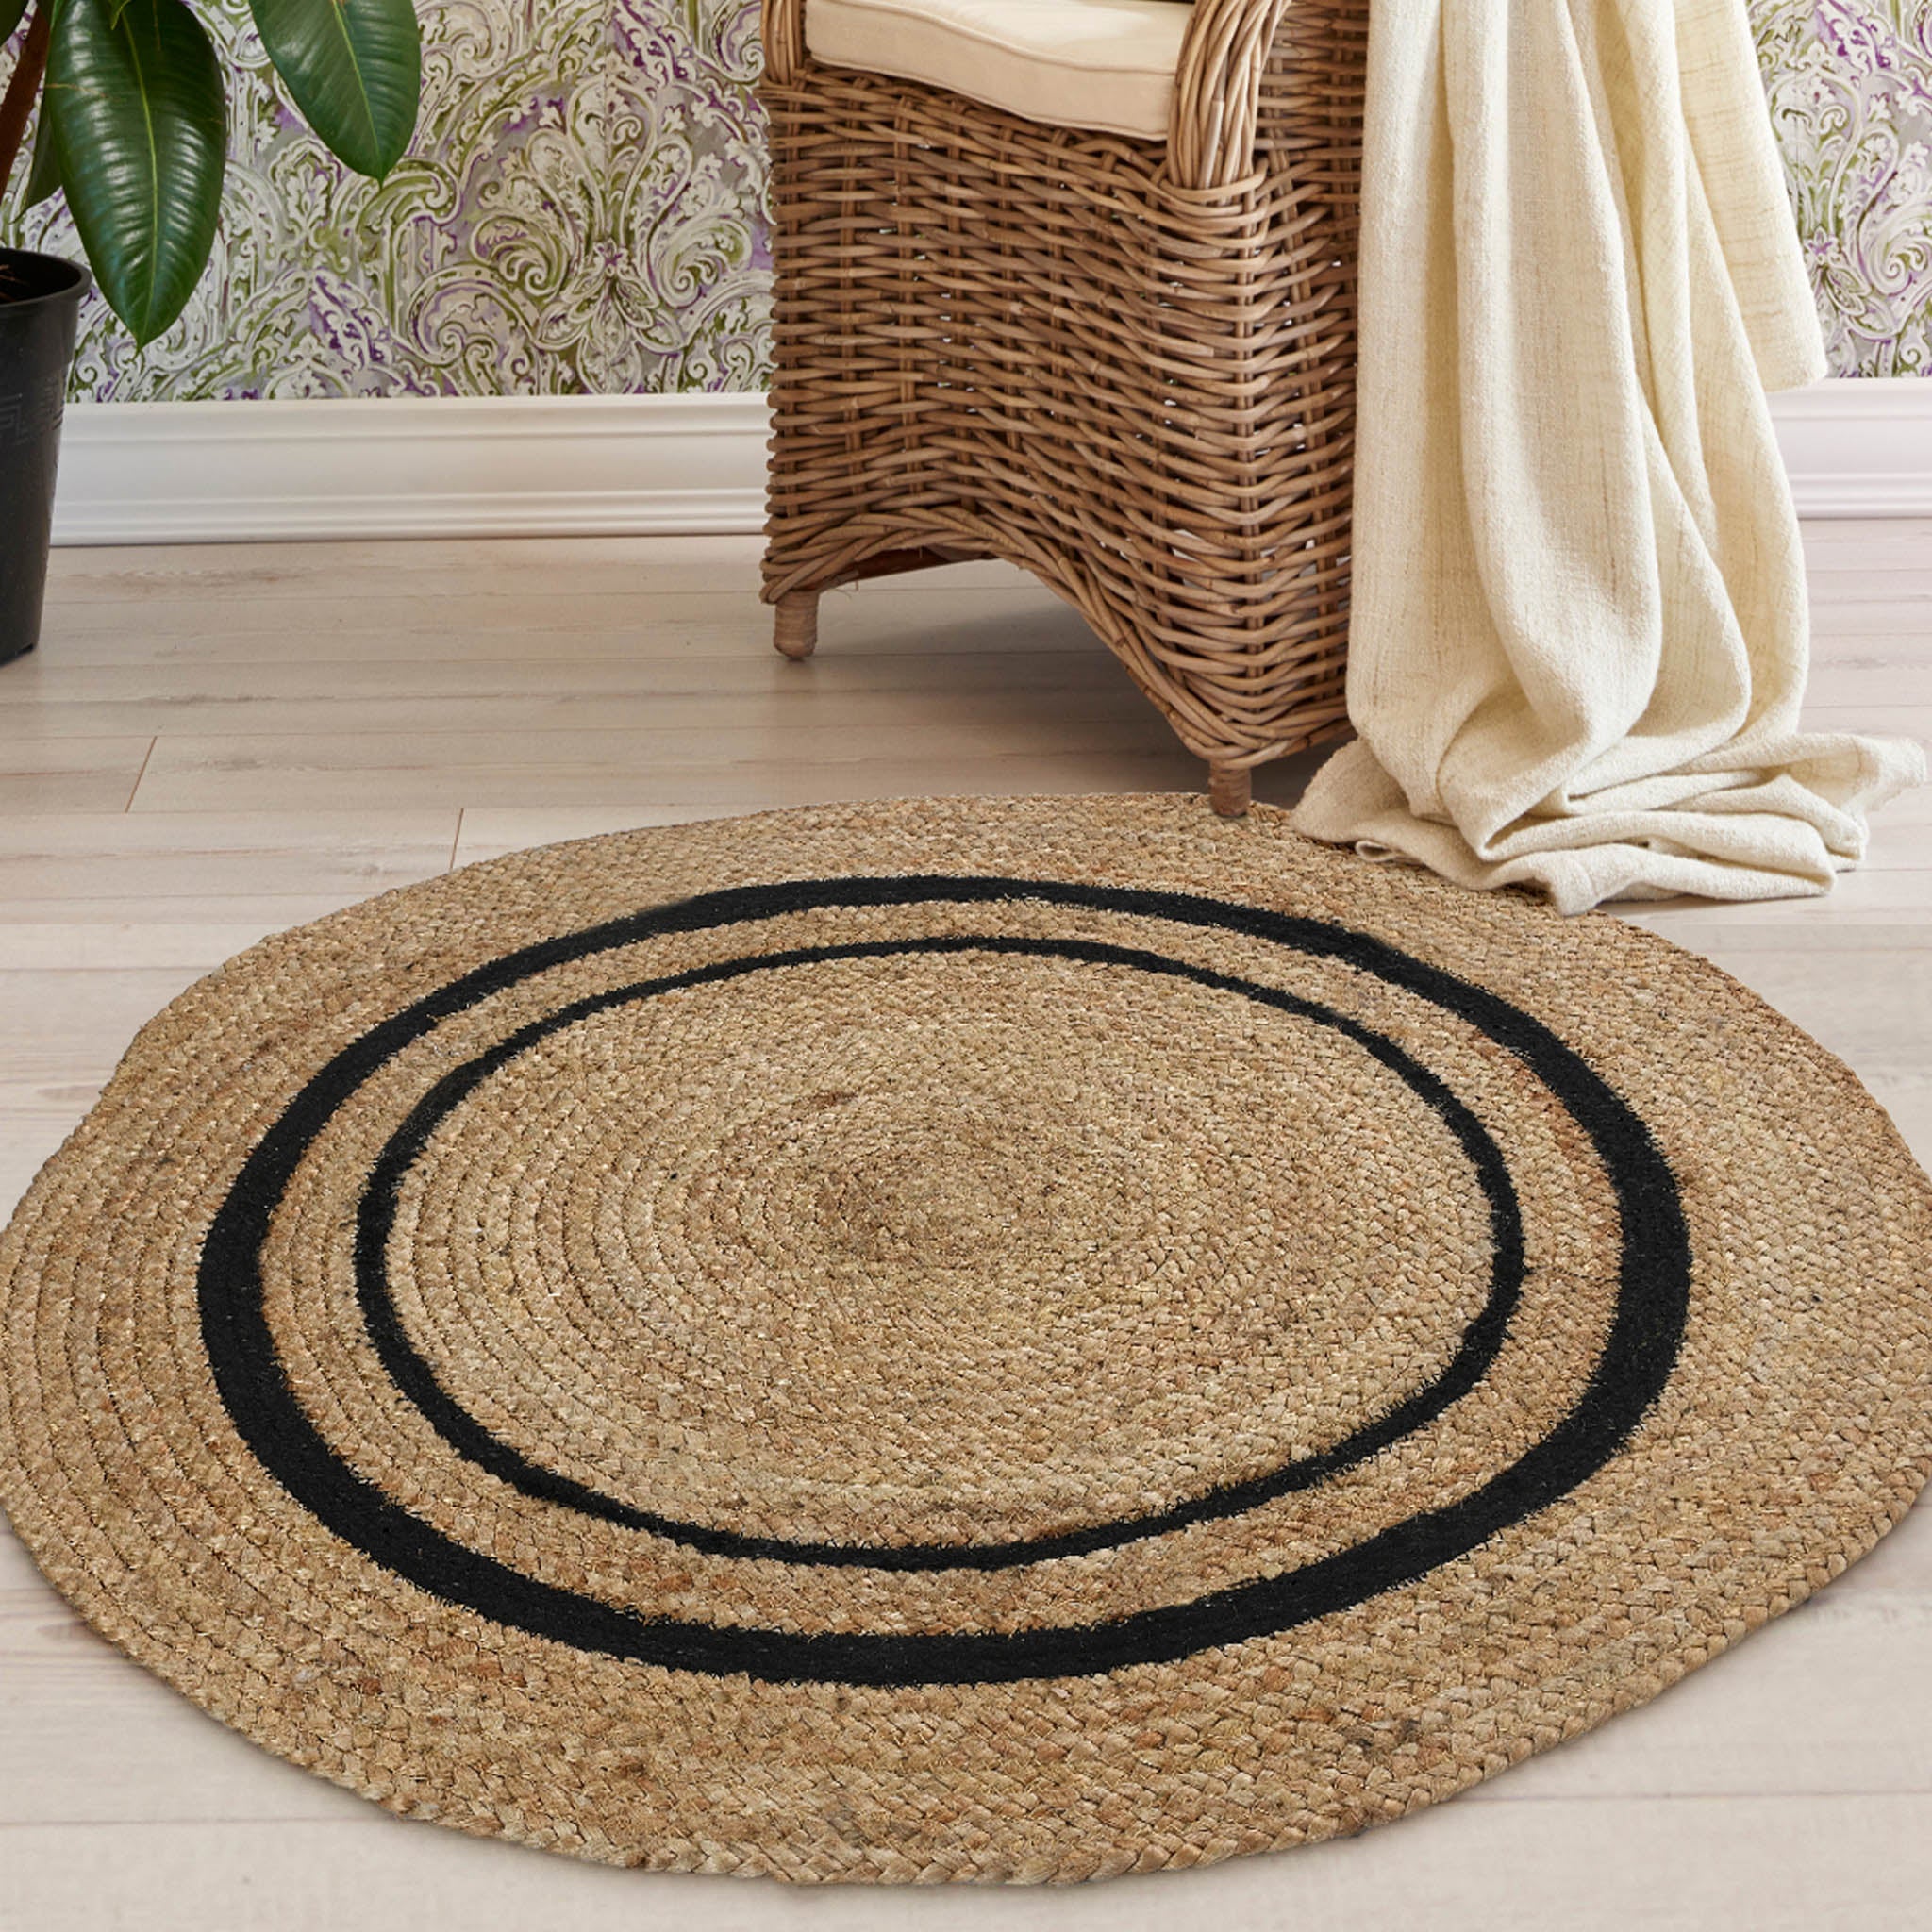 Shop for Rugs and Carpets, Jute Braided